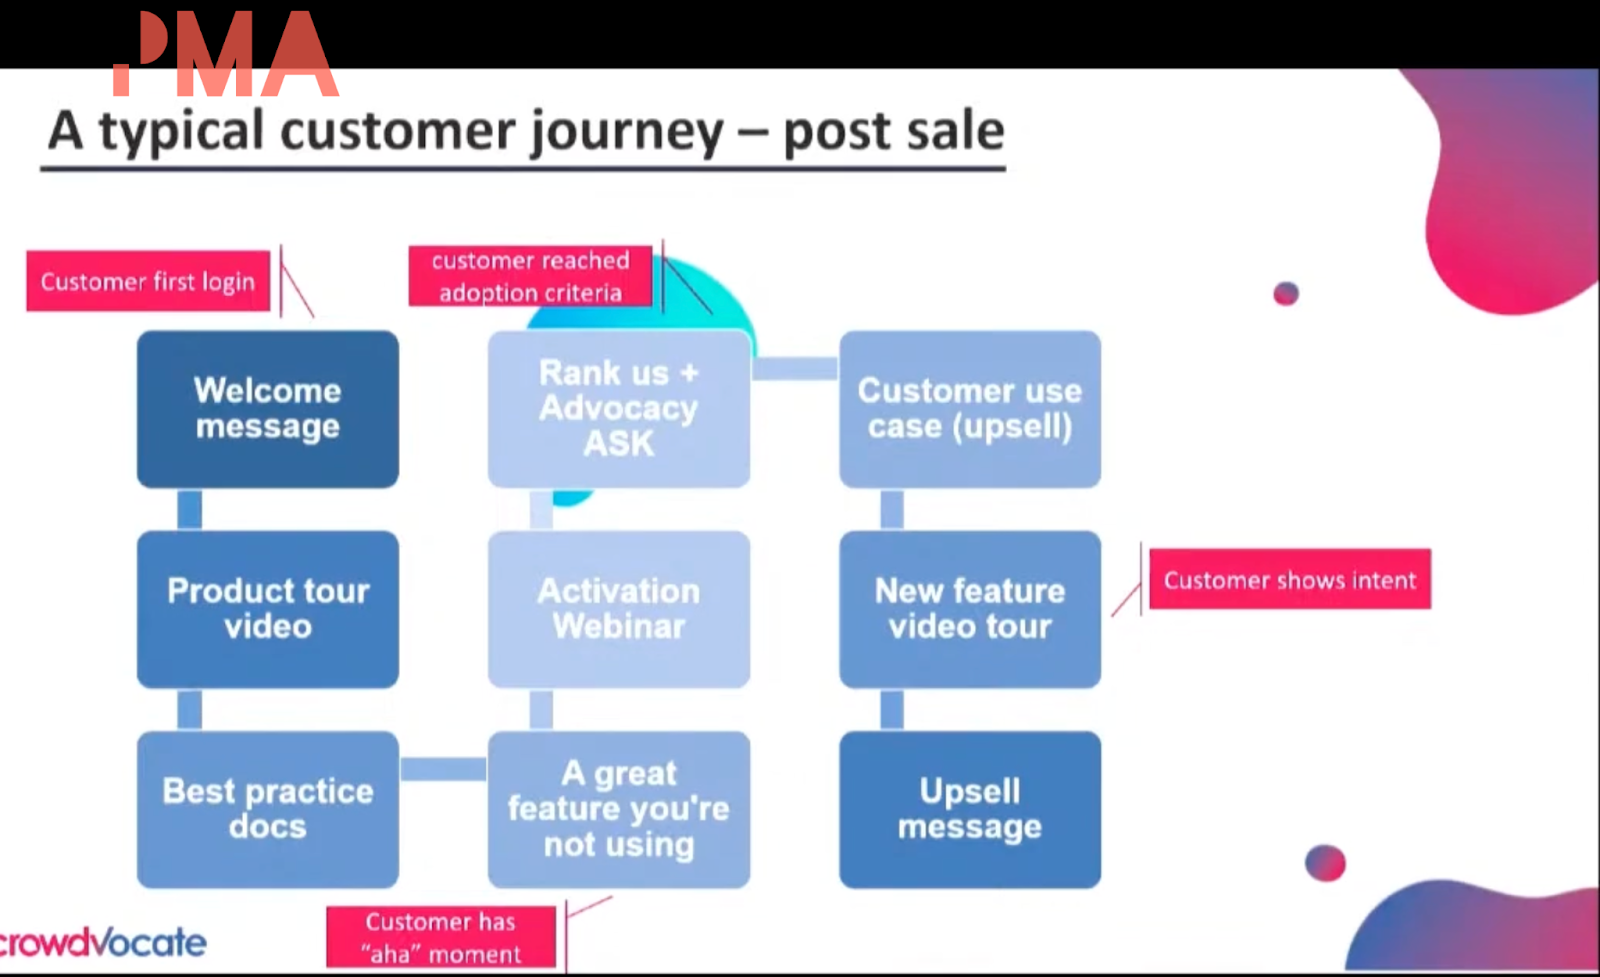 Screenshot showing a table that described the customer journey from 'customers first login' to 'upsell message'